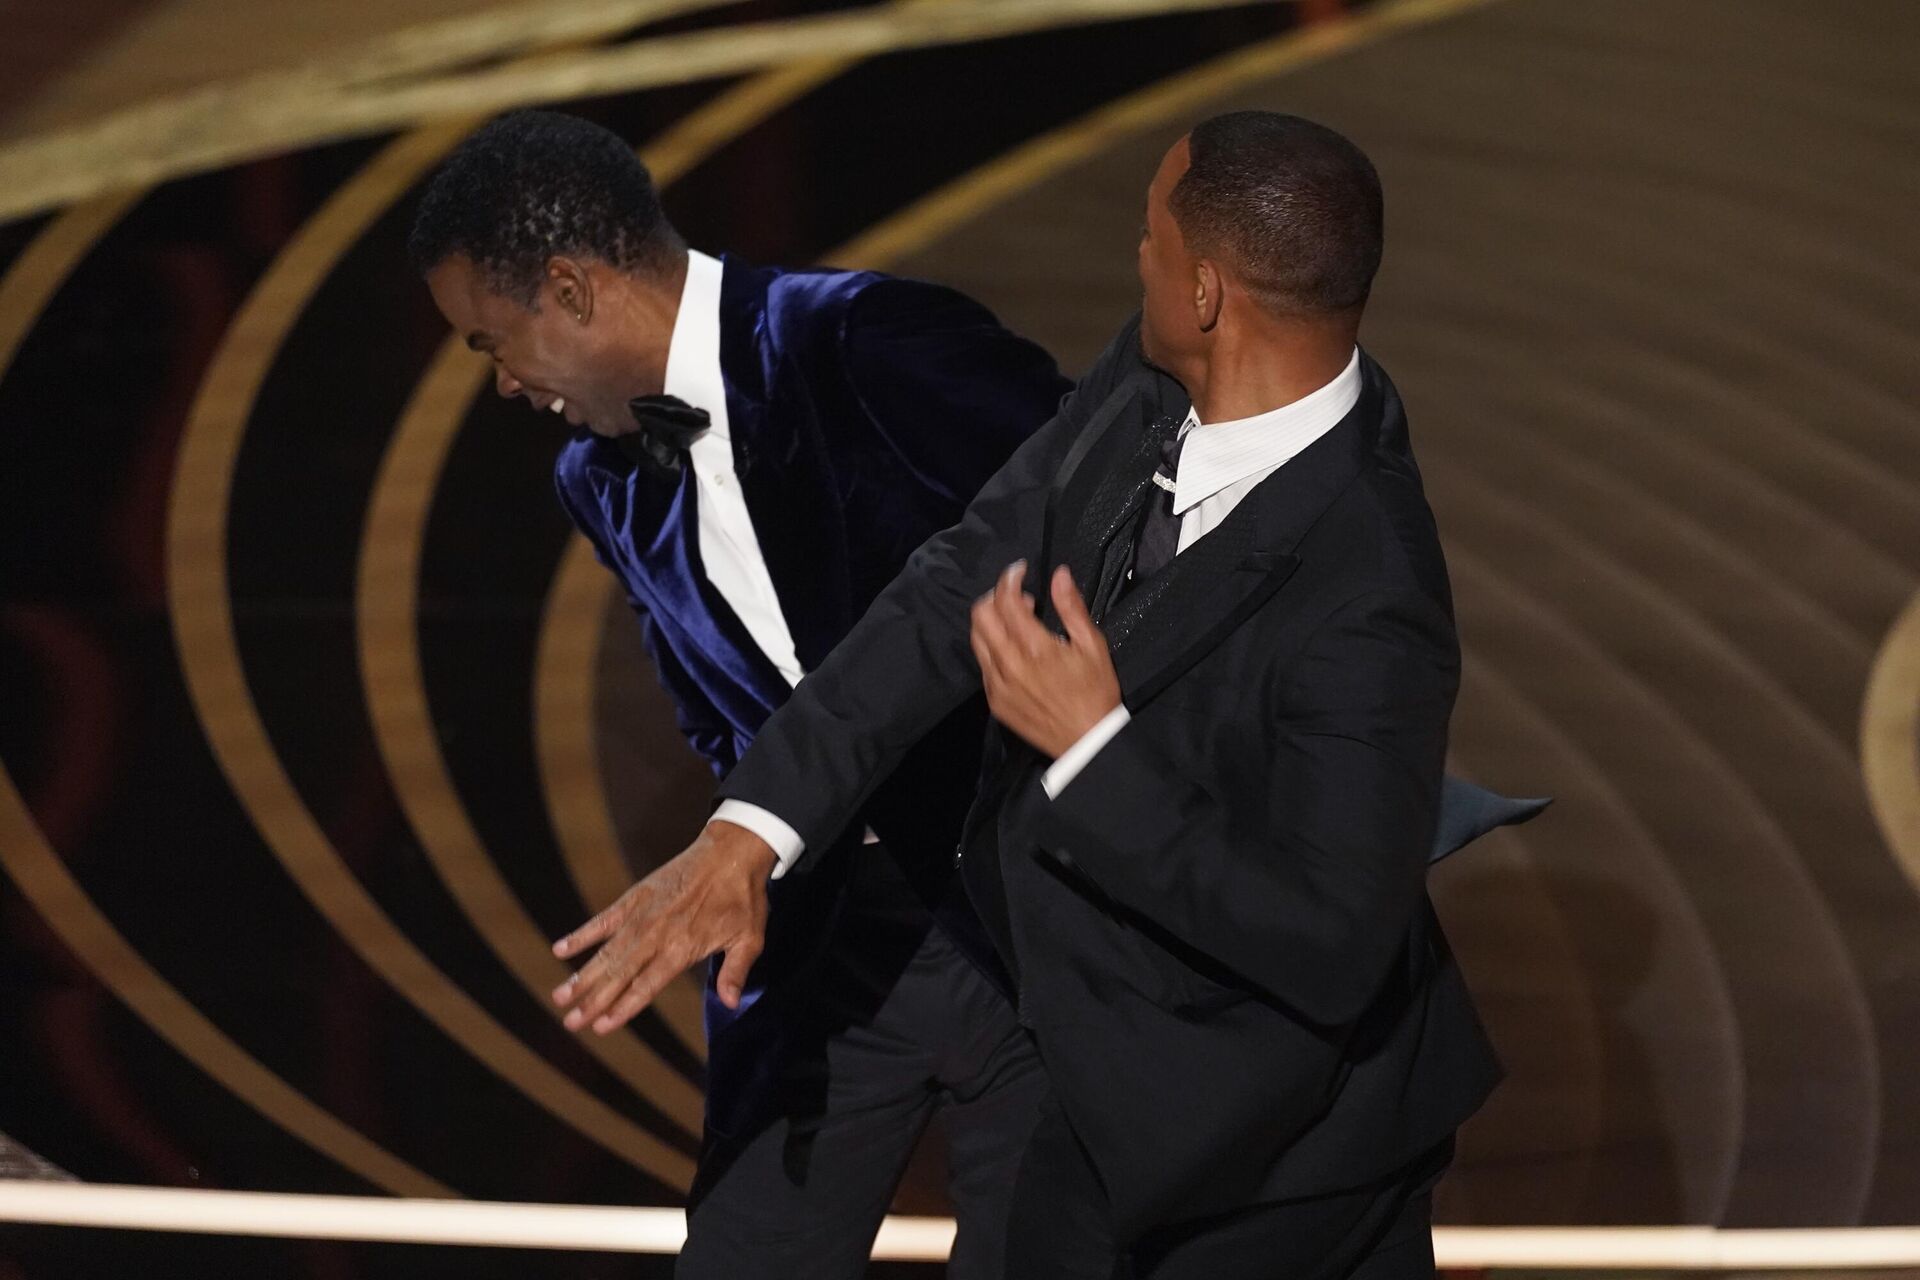 Will Smith, right, hits presenter Chris Rock on stage while presenting the award for best documentary feature at the Oscars on Sunday, March 27, 2022, at the Dolby Theatre in Los Angeles. - Sputnik International, 1920, 03.04.2022